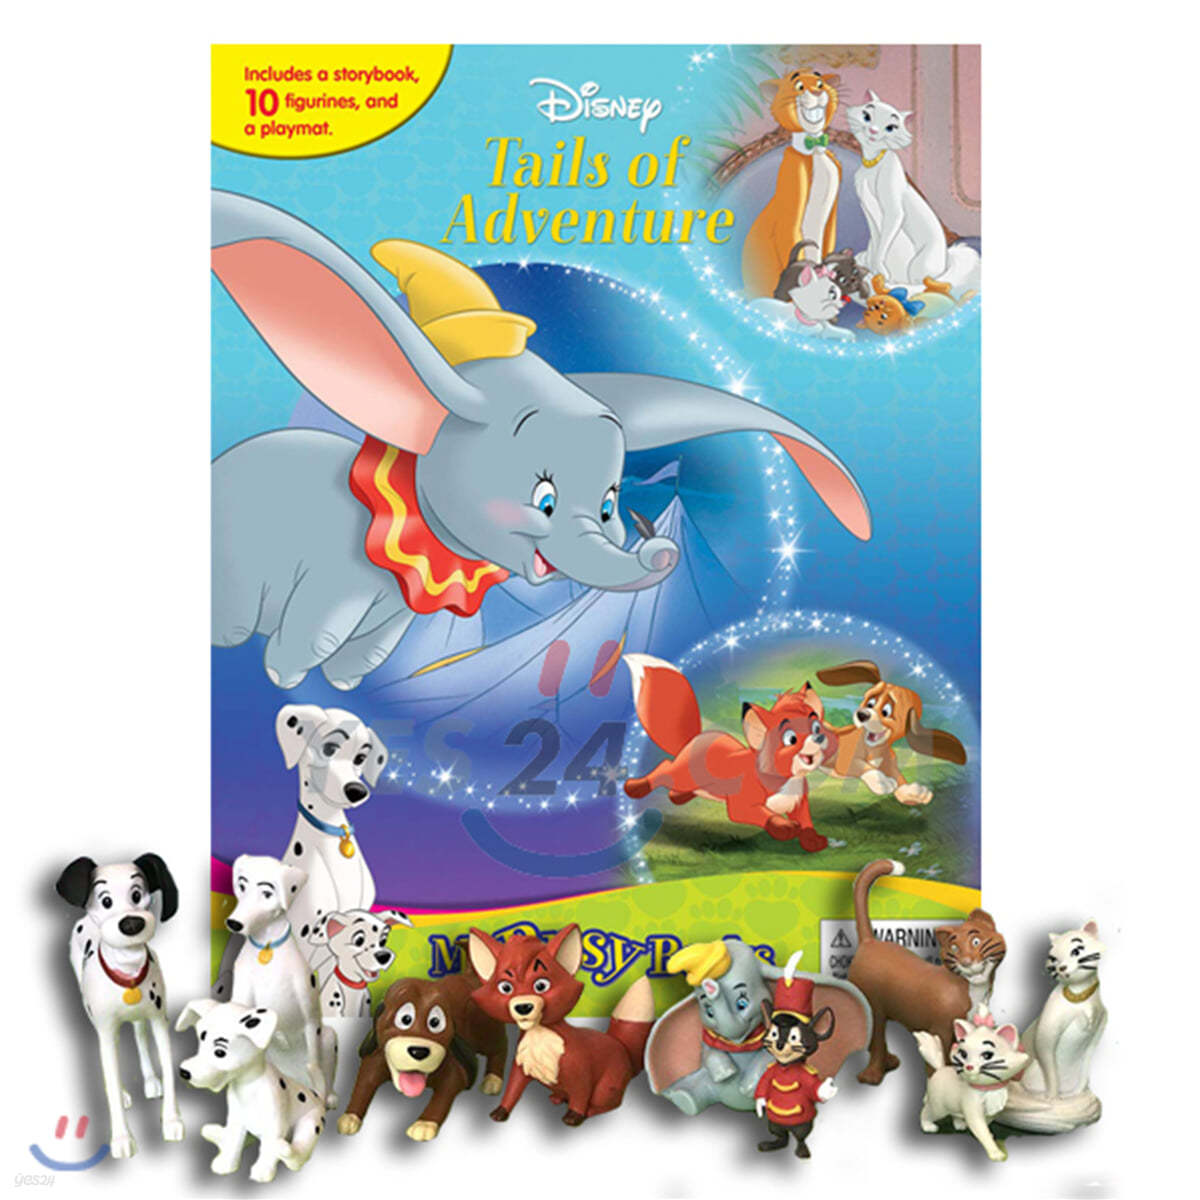 Disney Classics #2 My Busy Book : Tails of Adventure : Dumbo, Pongo, Duchess, Copper, And Their Friends 디즈니 클래식 2 비지북